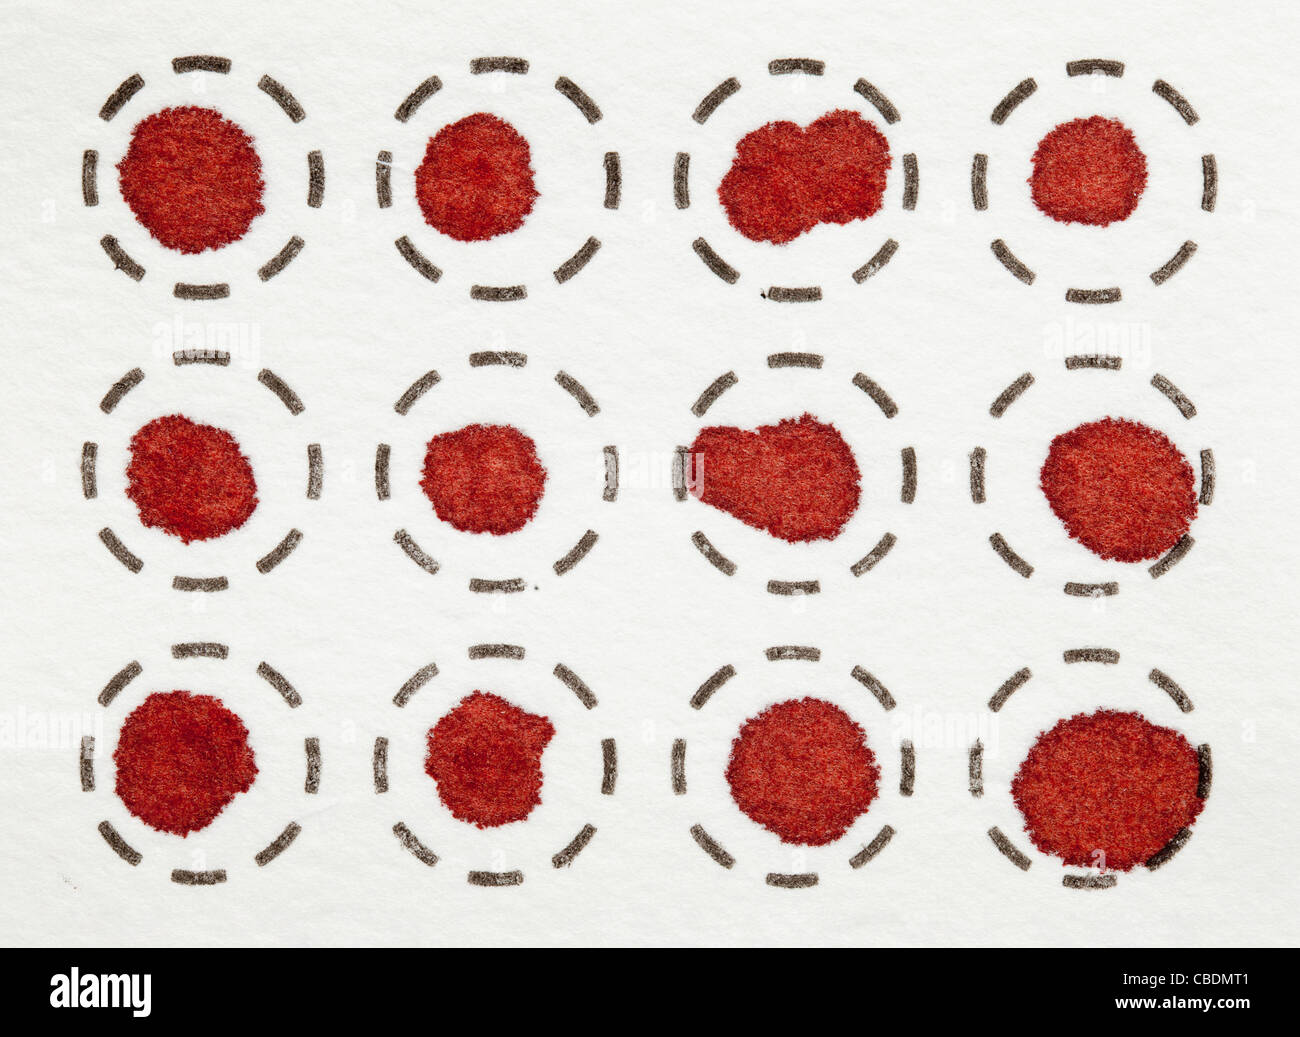 dry blood spots on a fiber filter for laboratory analysis Stock Photo